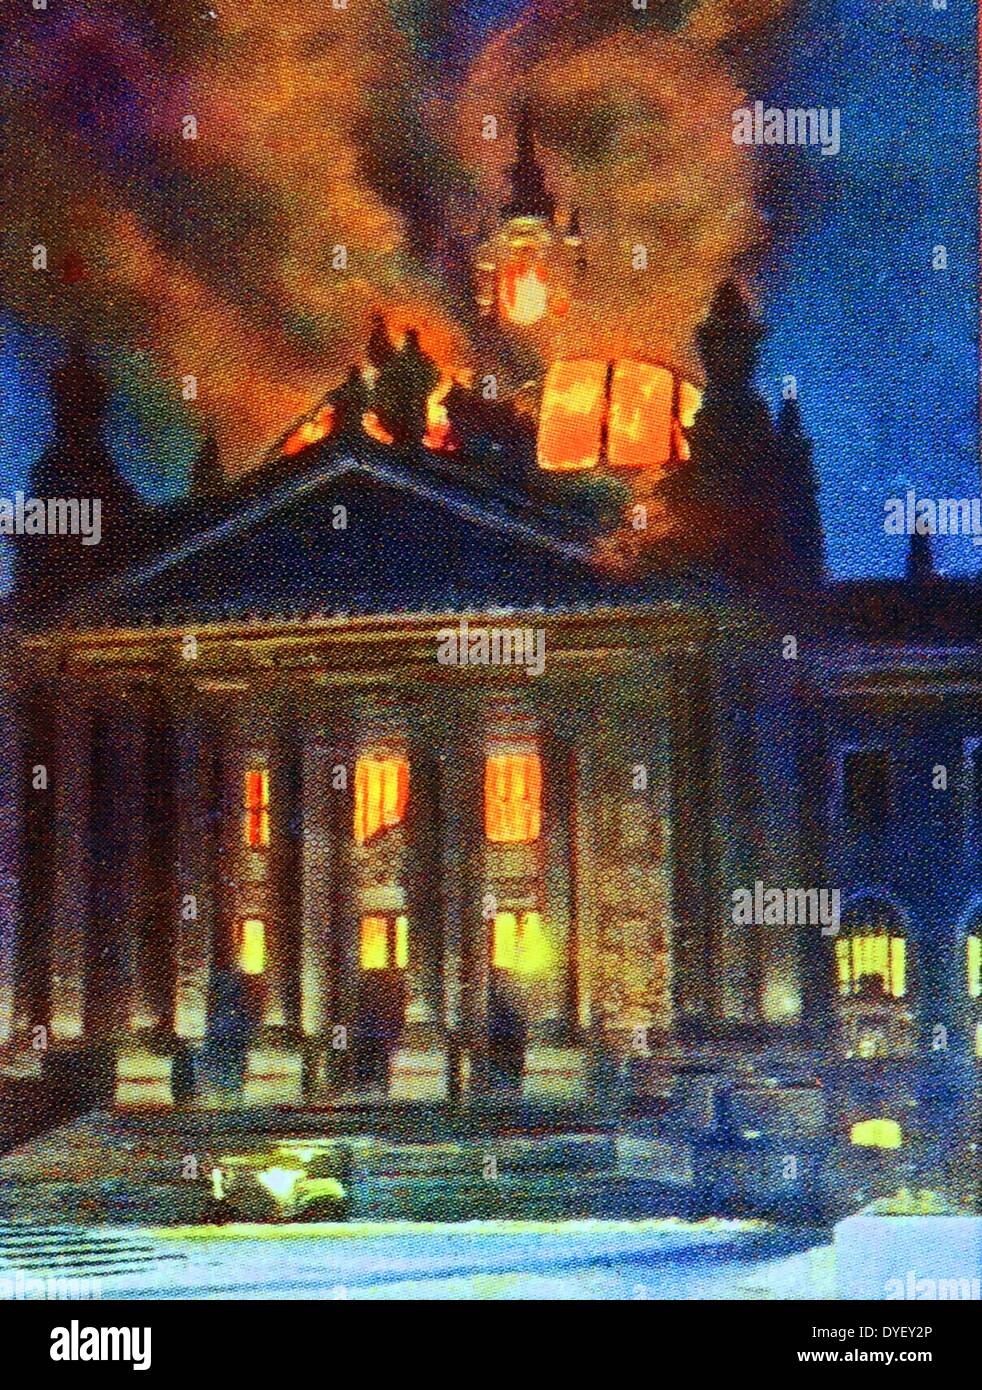 The Reichstag fire was an arson attack on the Reichstag building in Berlin on 27 February 1933. The event is seen as pivotal in the establishment of Nazi Germany Stock Photo